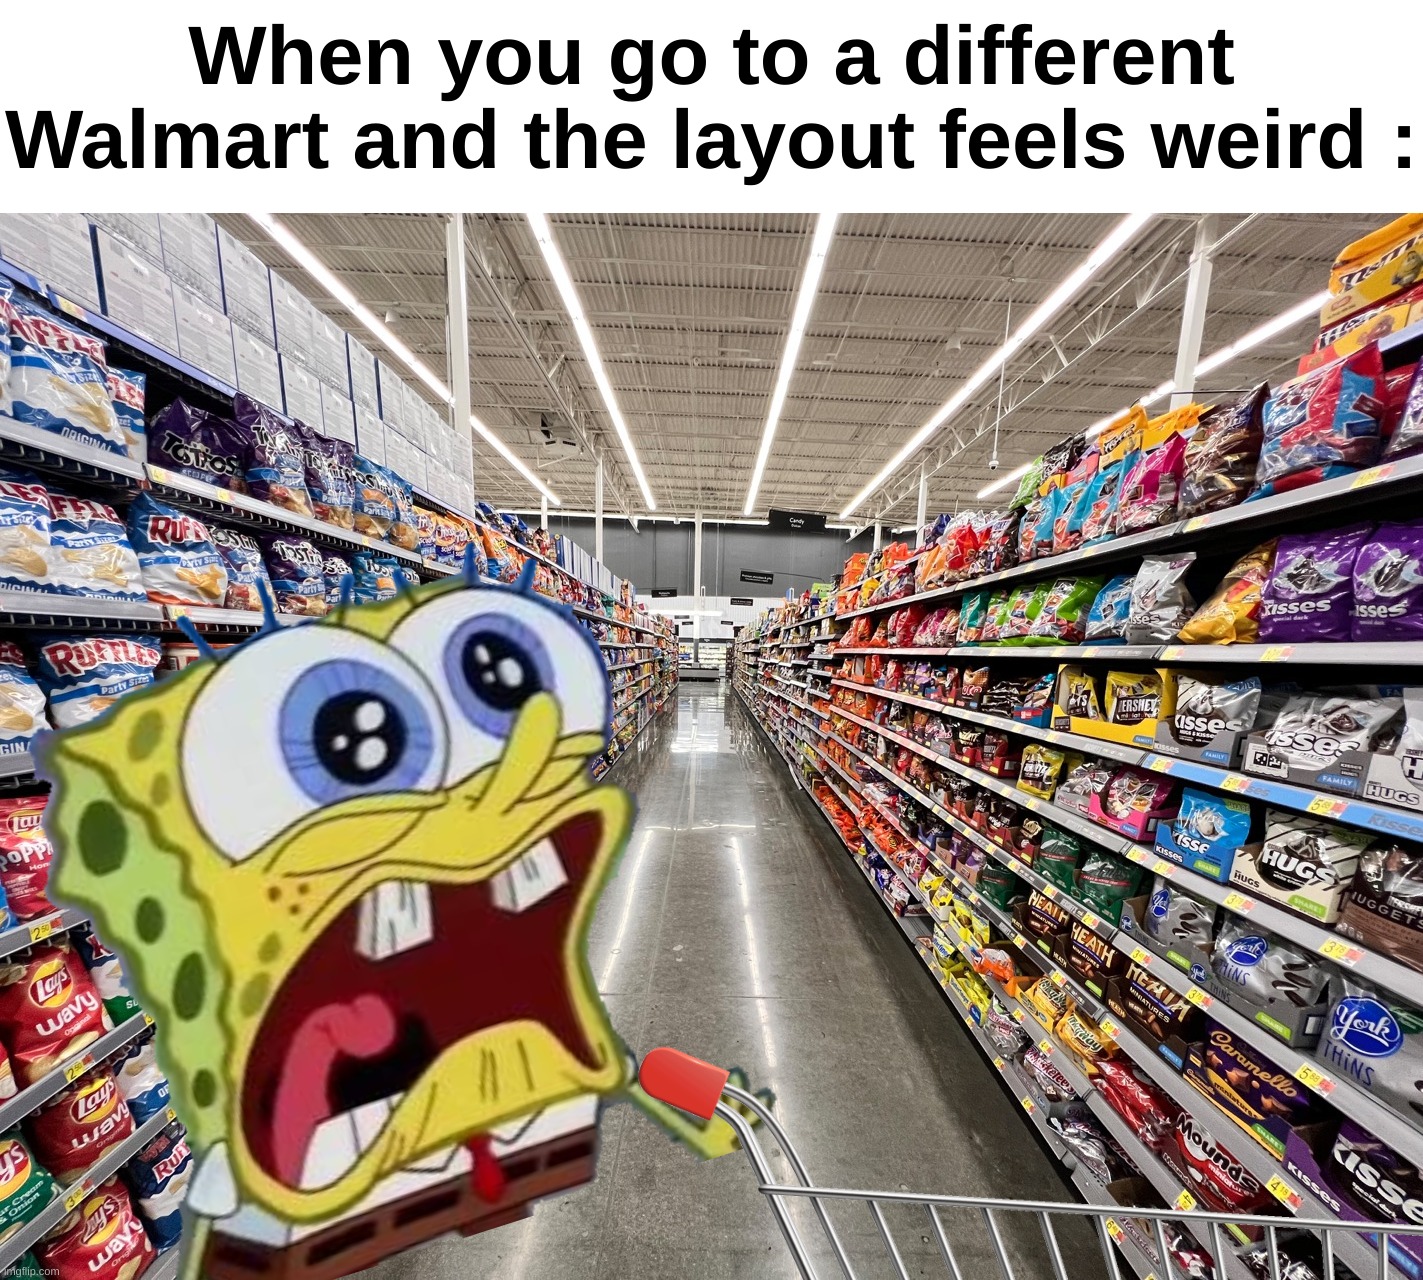 Then I struggle finding the products that I need | When you go to a different Walmart and the layout feels weird : | image tagged in memes,funny,relatable,walmart,lost,front page plz | made w/ Imgflip meme maker